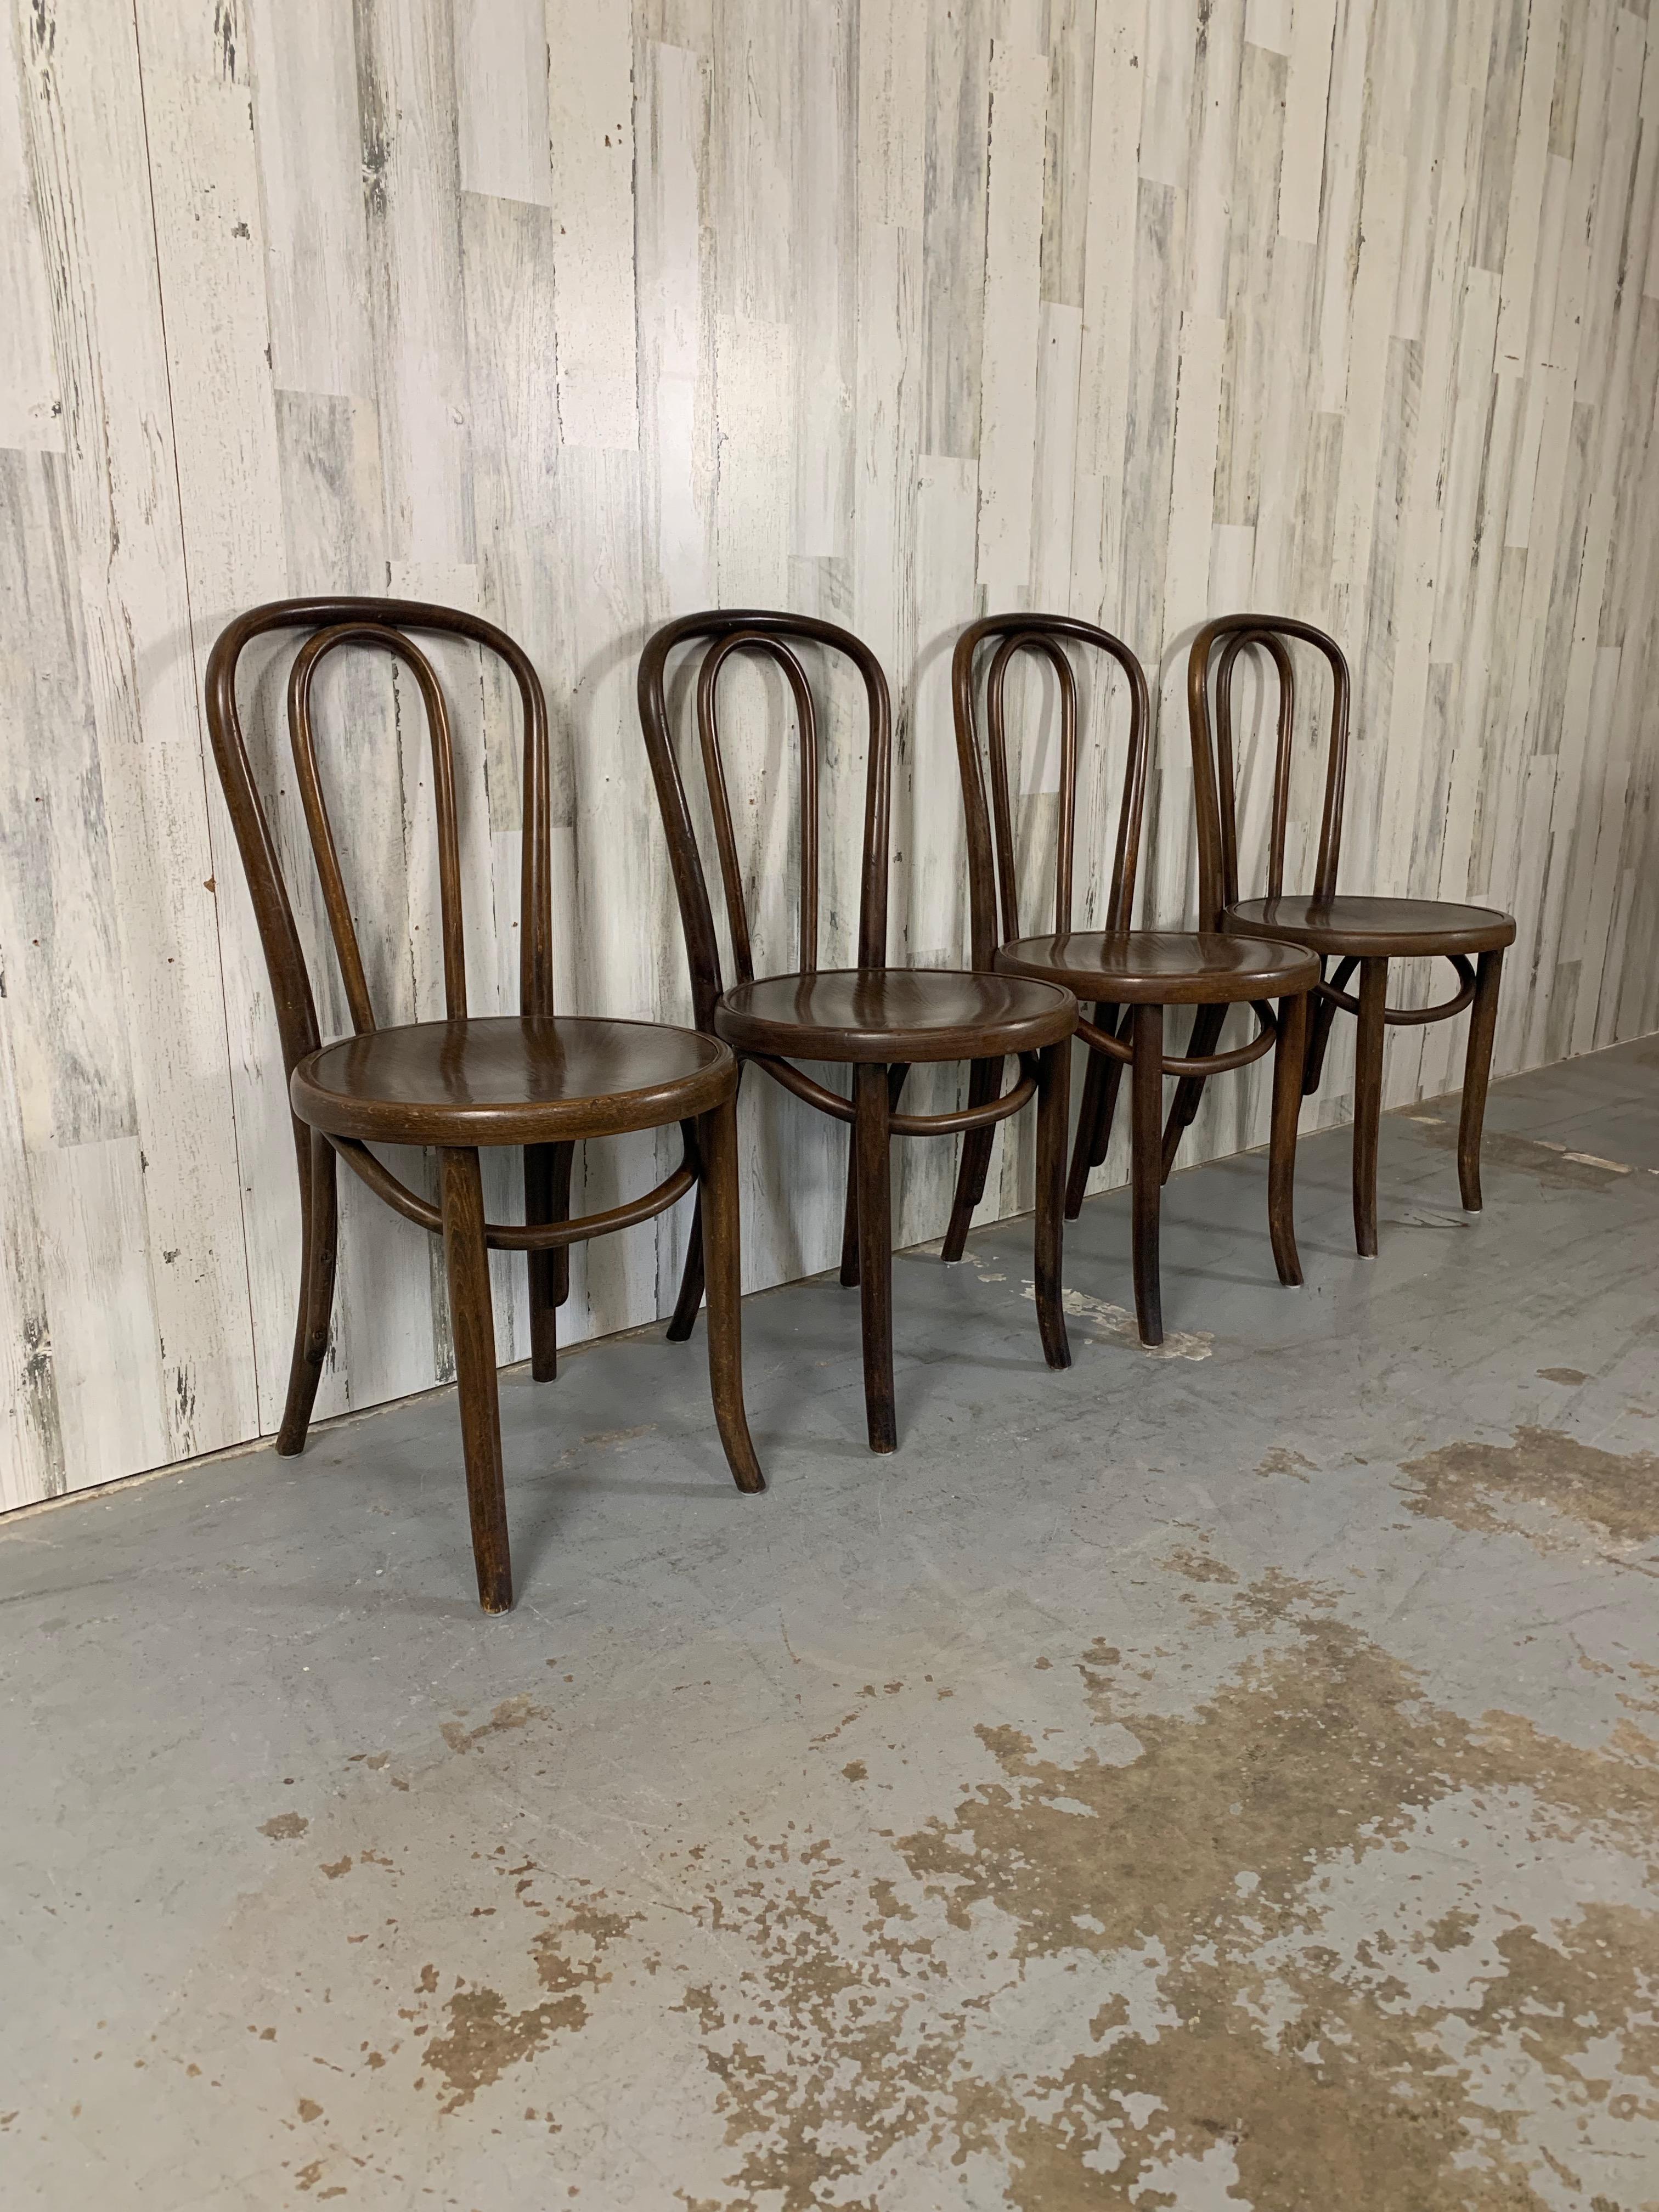 Made in Czechoslovakia in the 1920's at the height of Thonets bentwood production. This set of four is hard to come by in nice condition. 